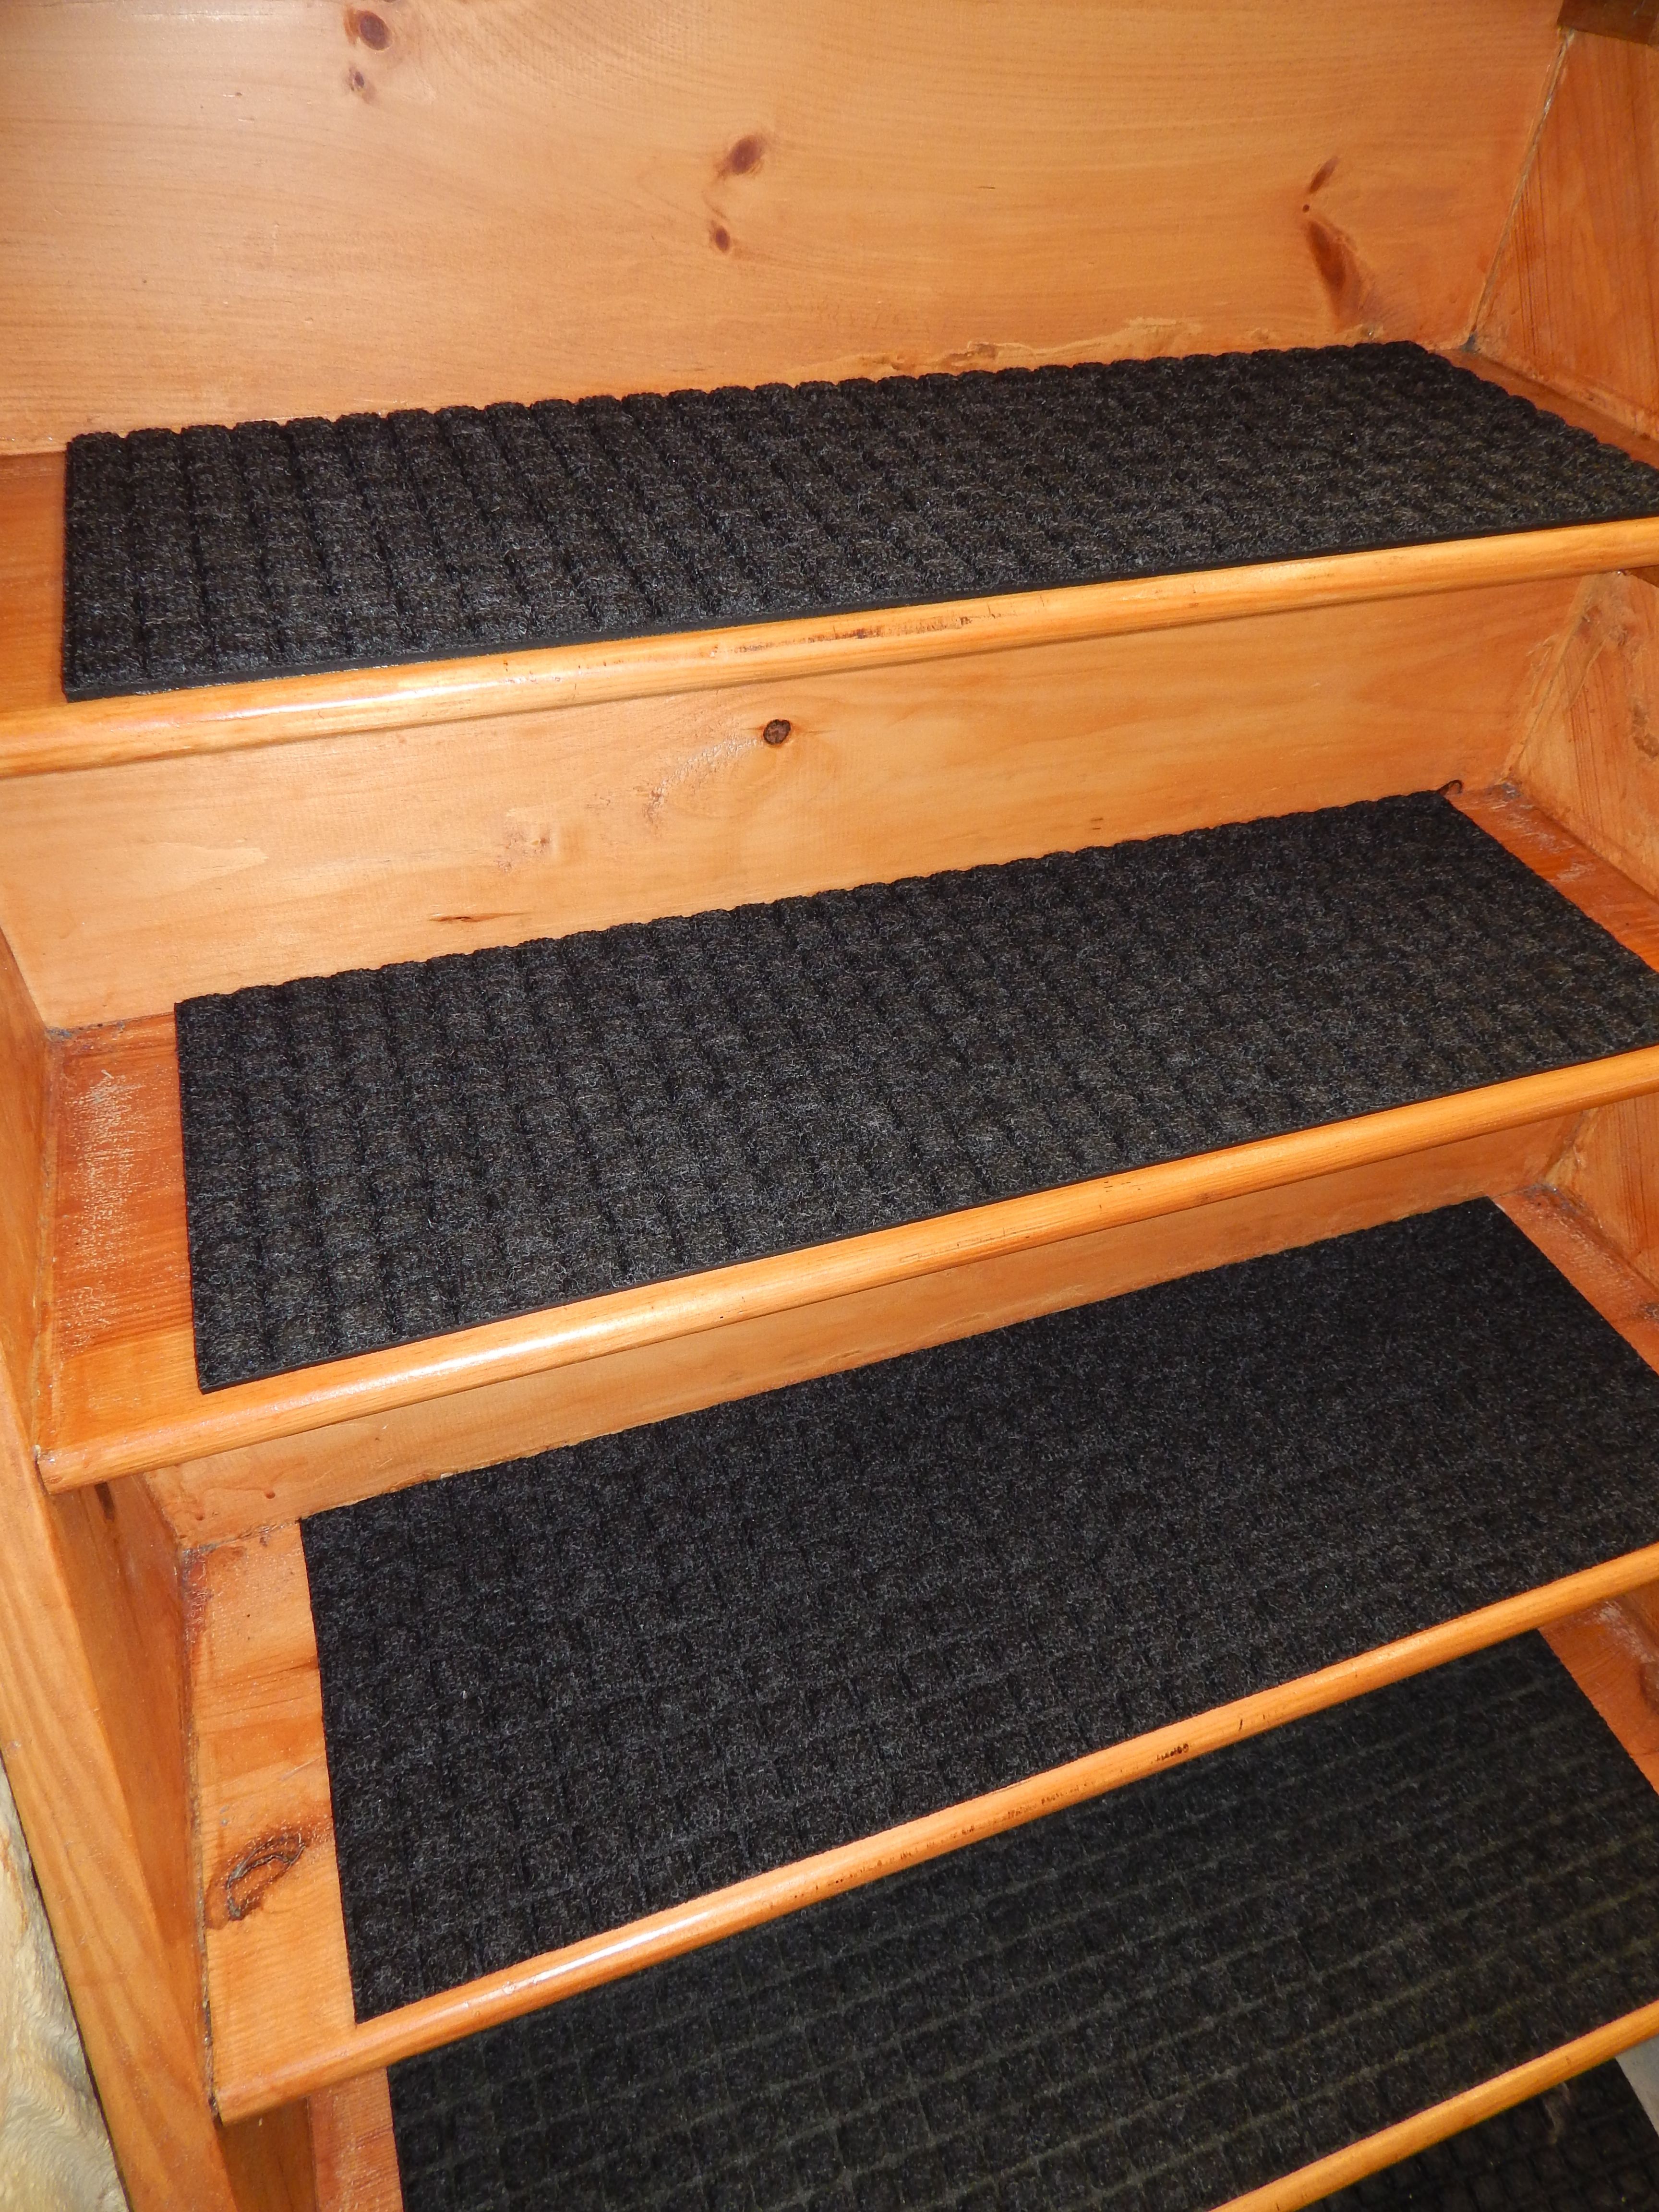 Flooring Carpeting Stair Treads Stair Treads Carpet Carpet Intended For Decorative Indoor Stair Treads (View 17 of 20)